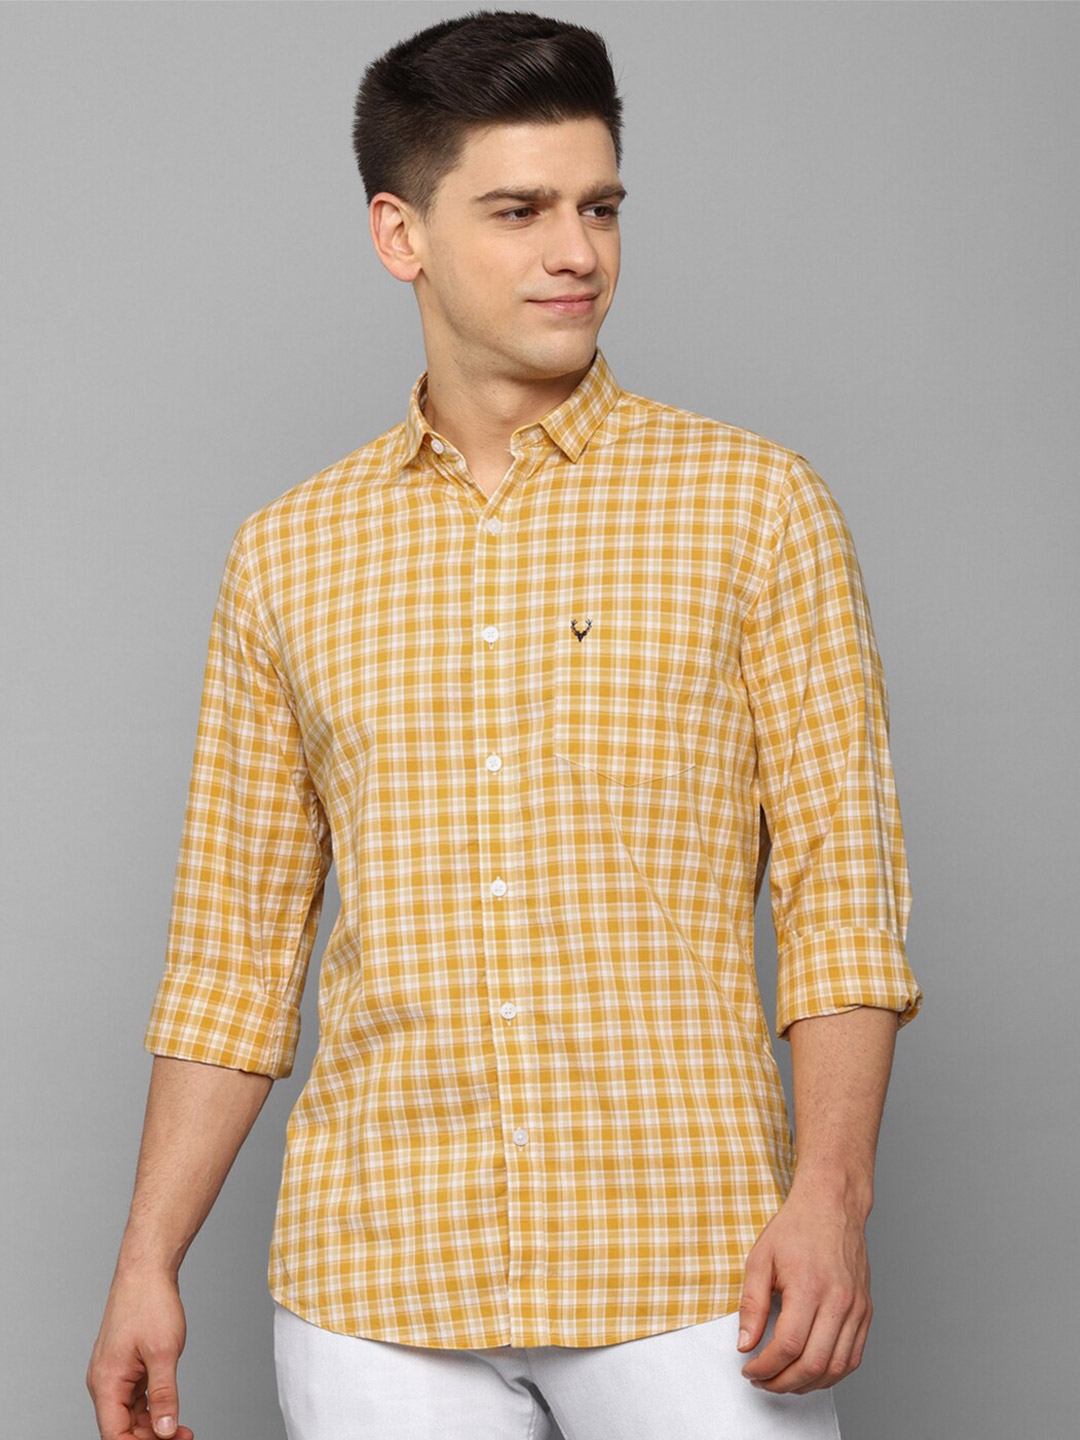 Buy Allen Solly Men Yellow Slim Fit Gingham Checks Checked Casual Shirt ...